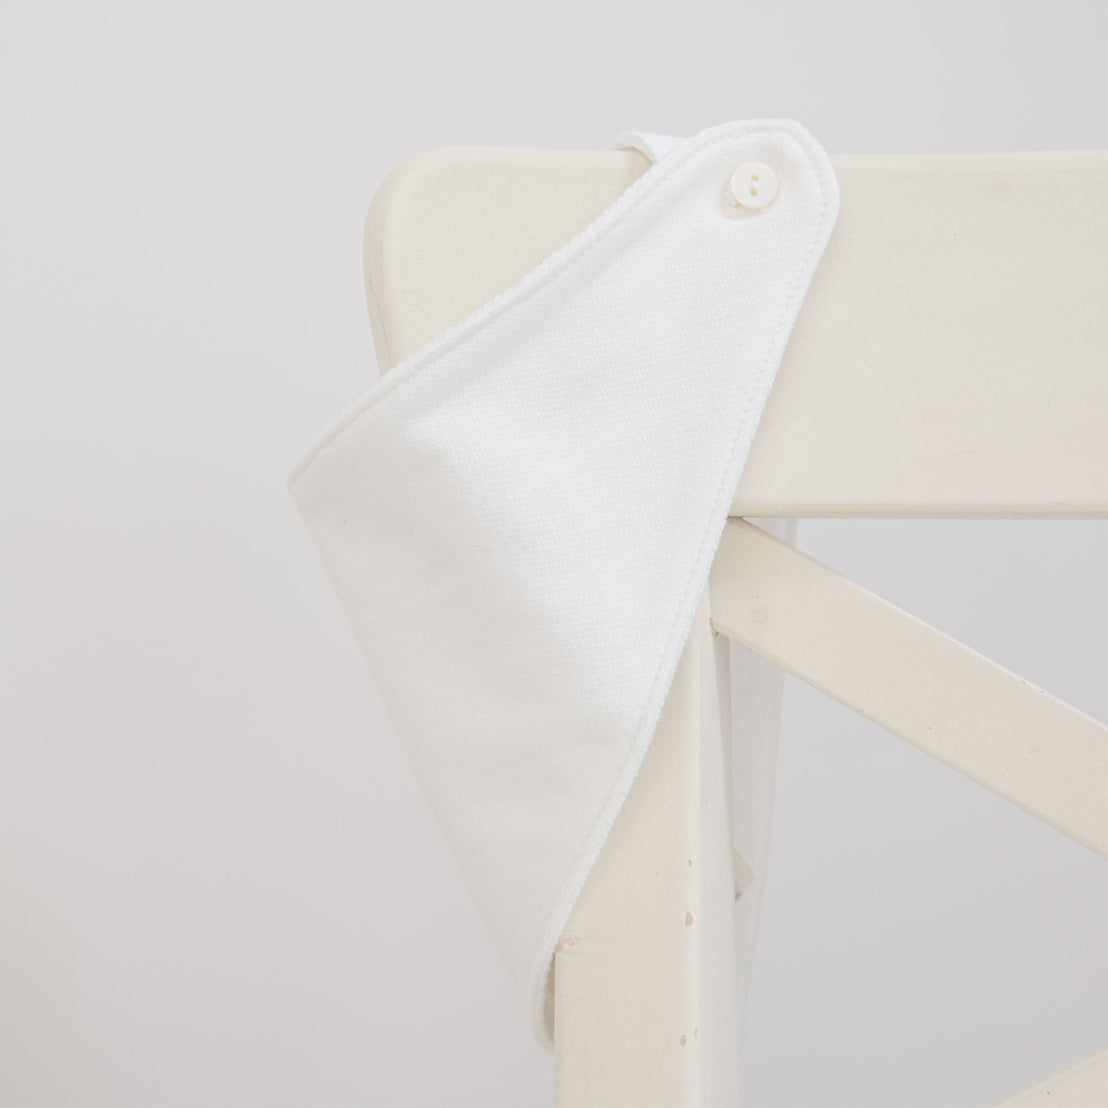 Flat lay photo of the Elliott Bib, made from white French Terry cotton, on a white chair showing the button closure.